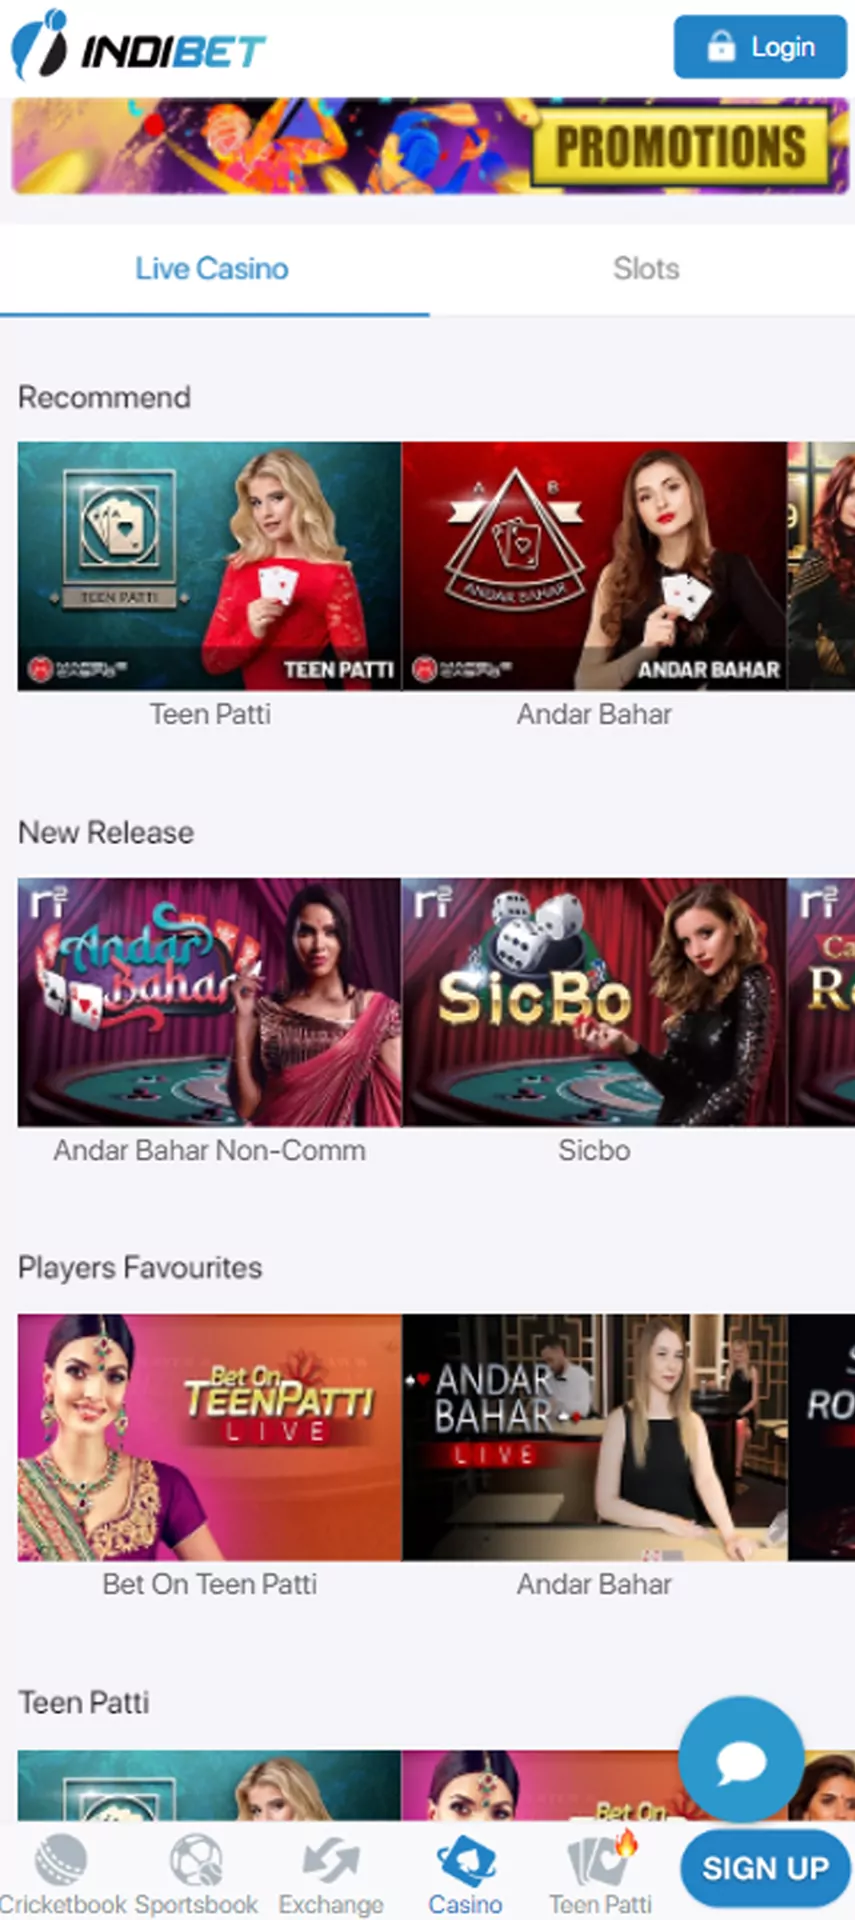 Indibet live casino app has all popular games in india run by professional dealers.